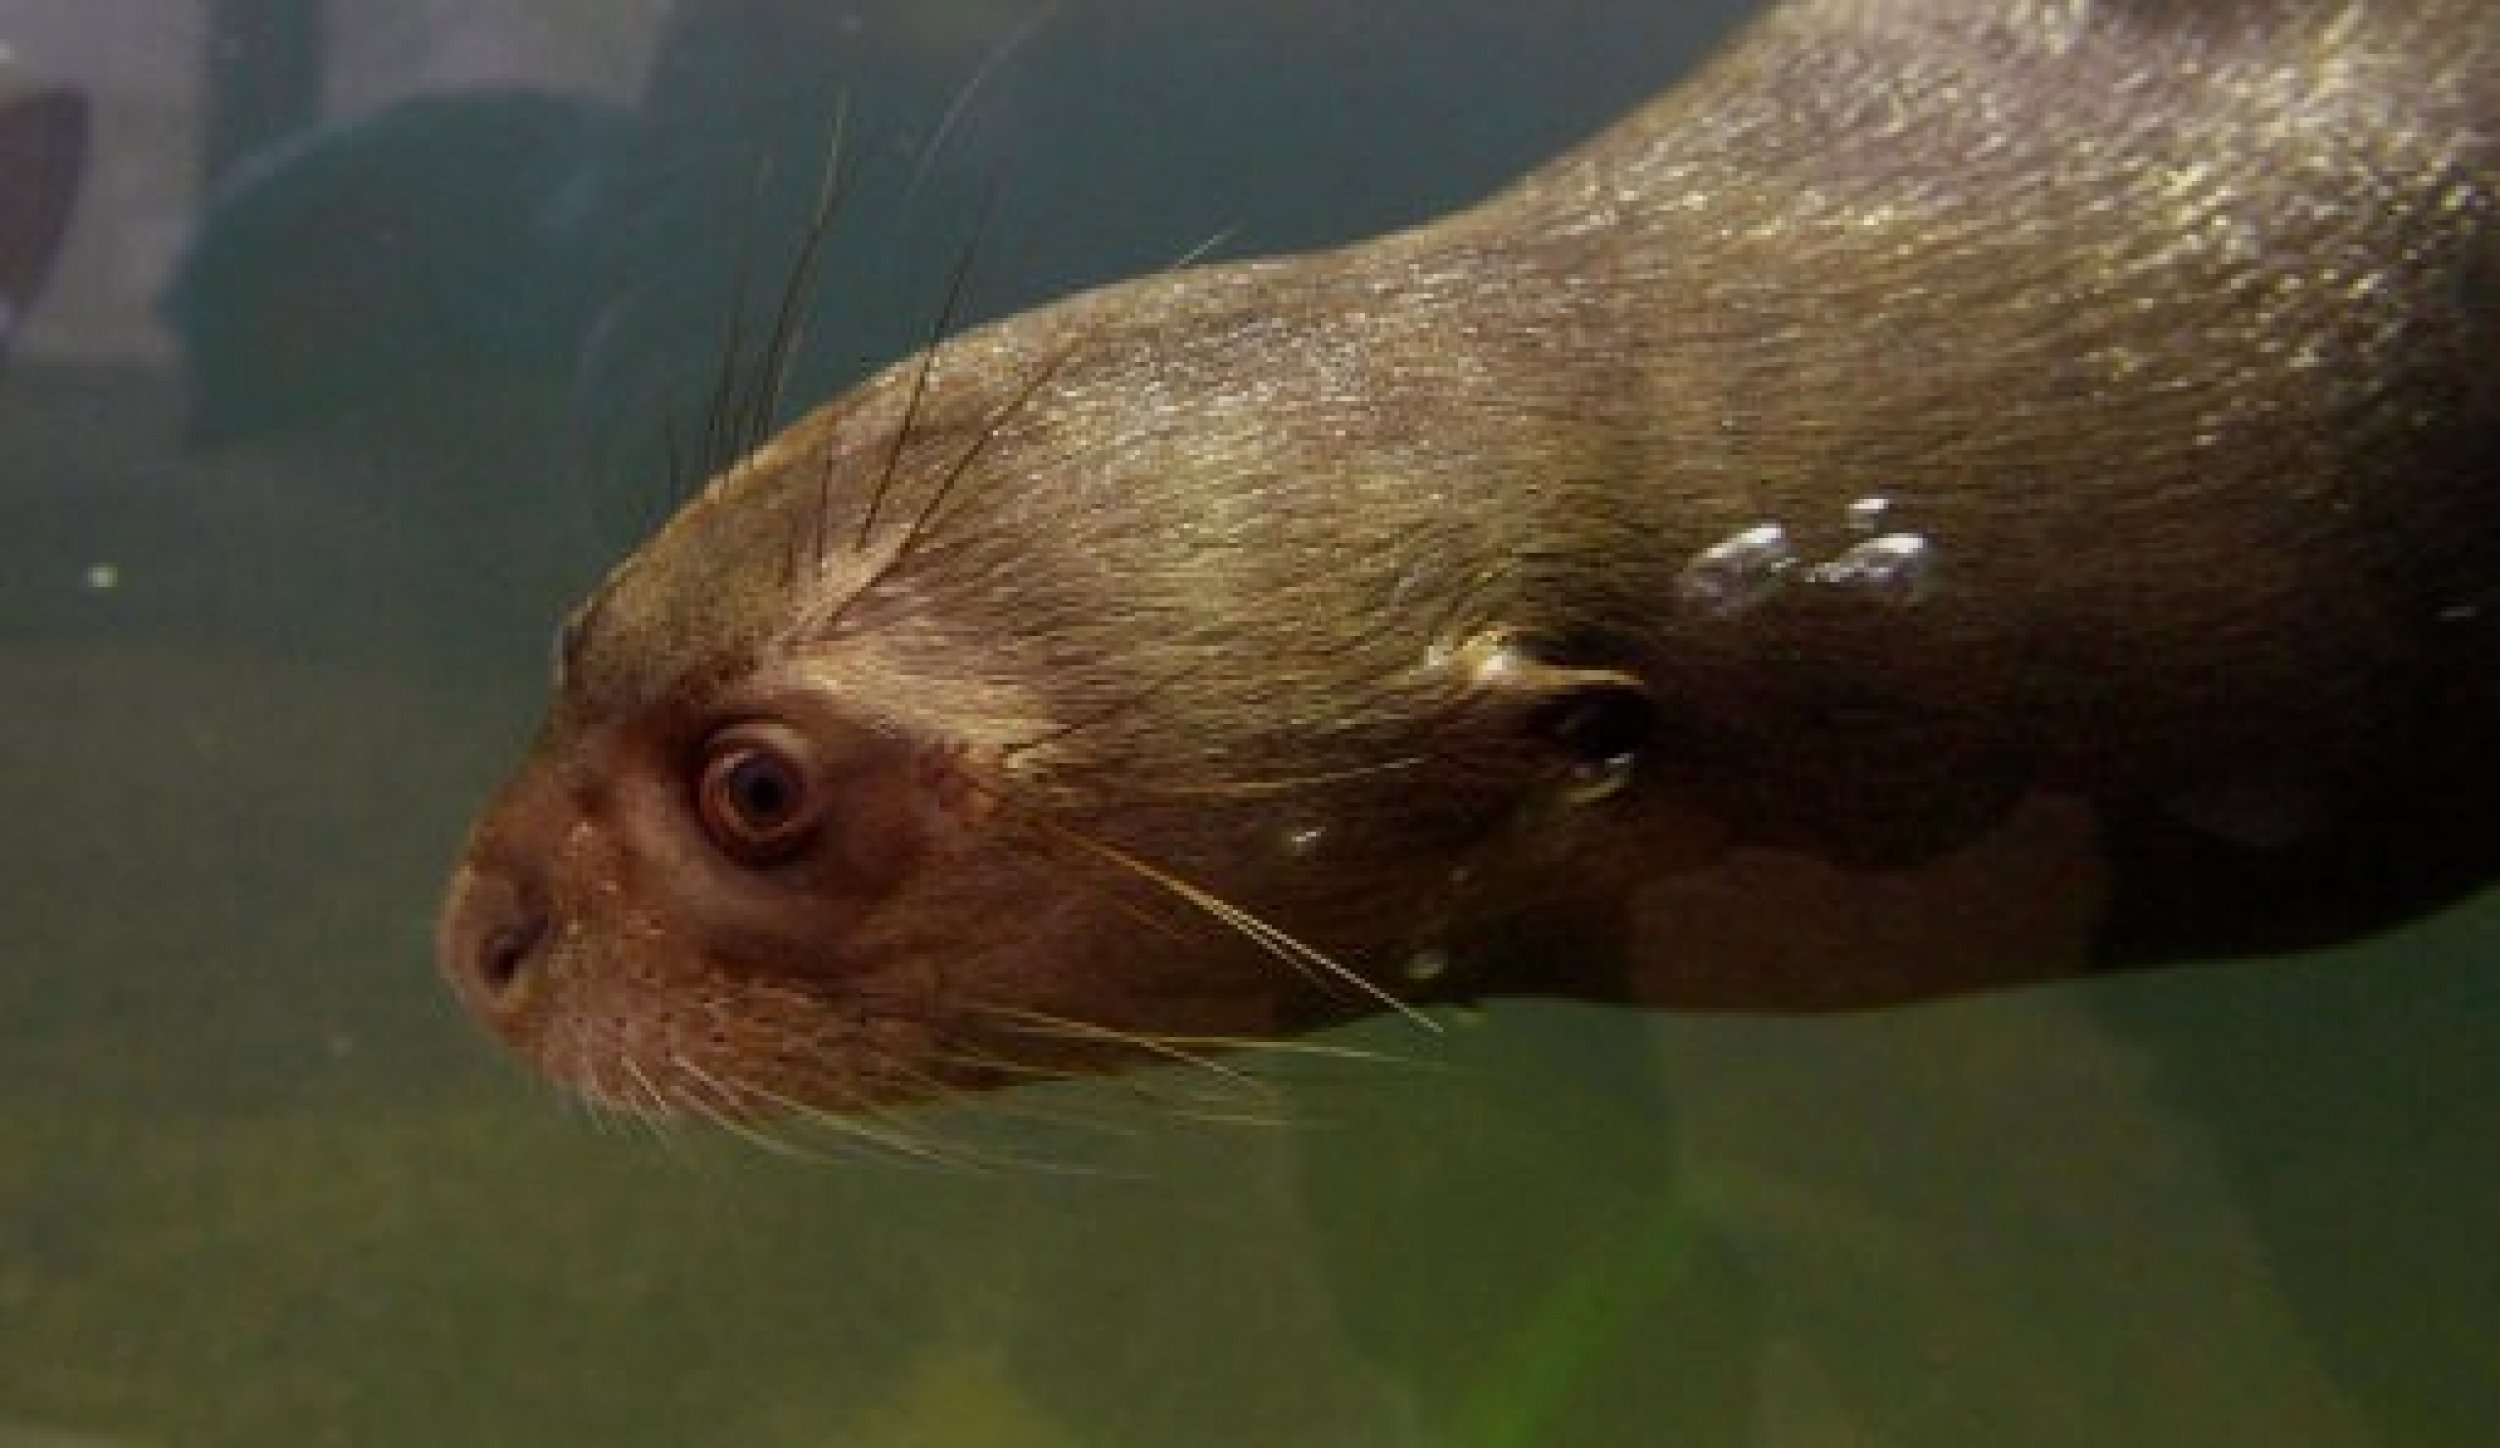 A giant otter at Chester Zoo, where the UK039s first underwater viewing zone for giant otters will open next week.